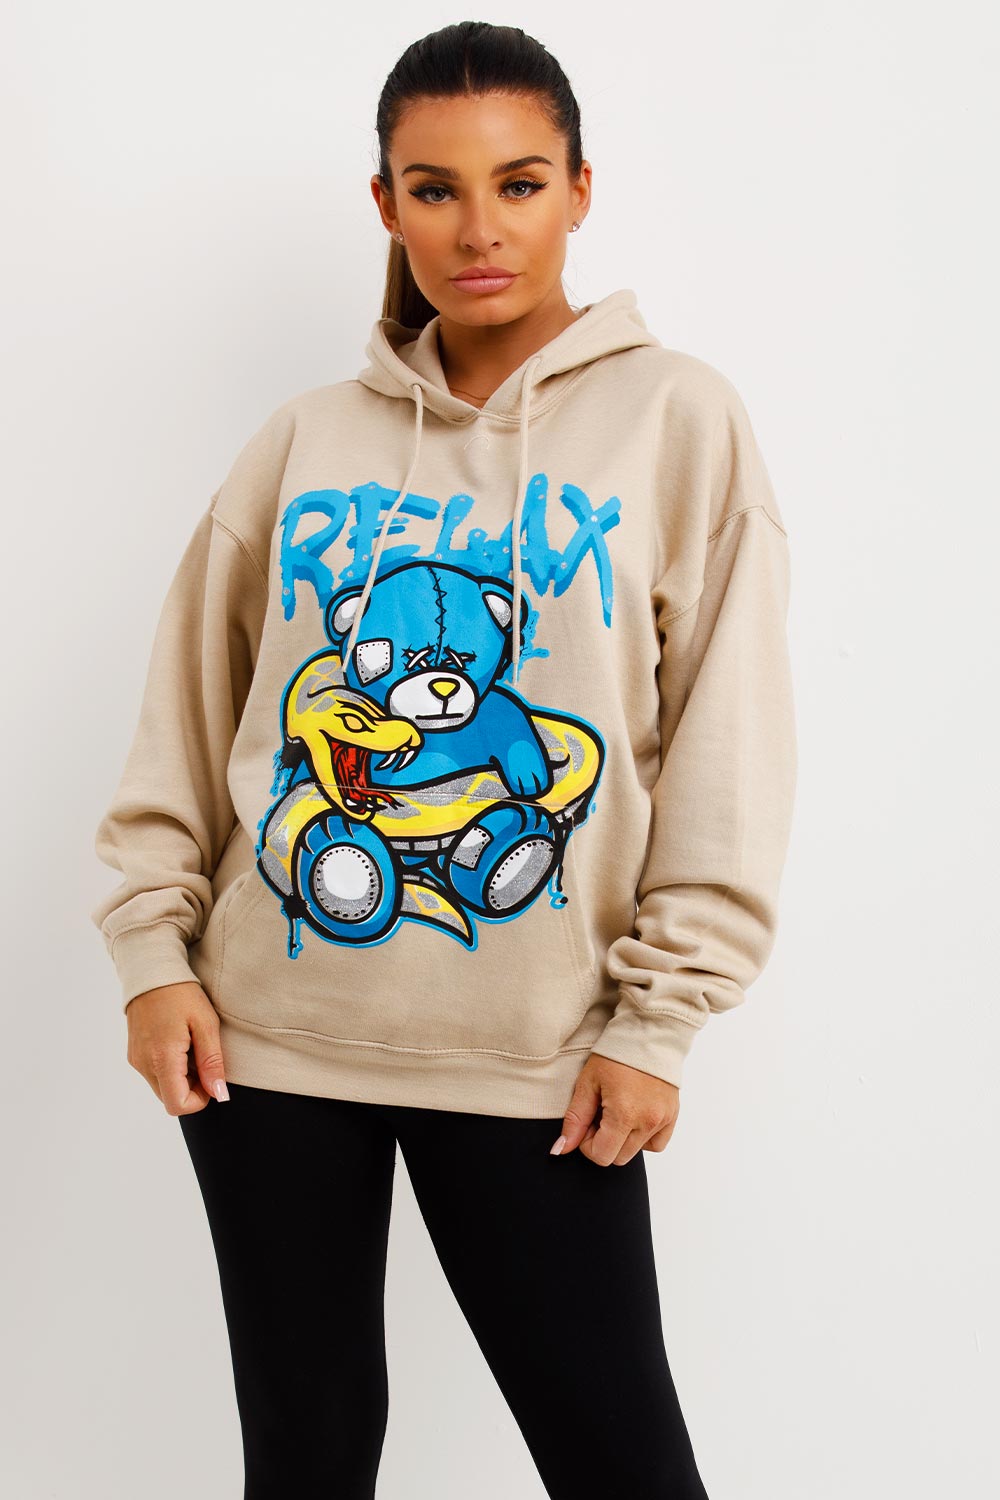 Oversized Teddy Graphic Hoodie And Short Set